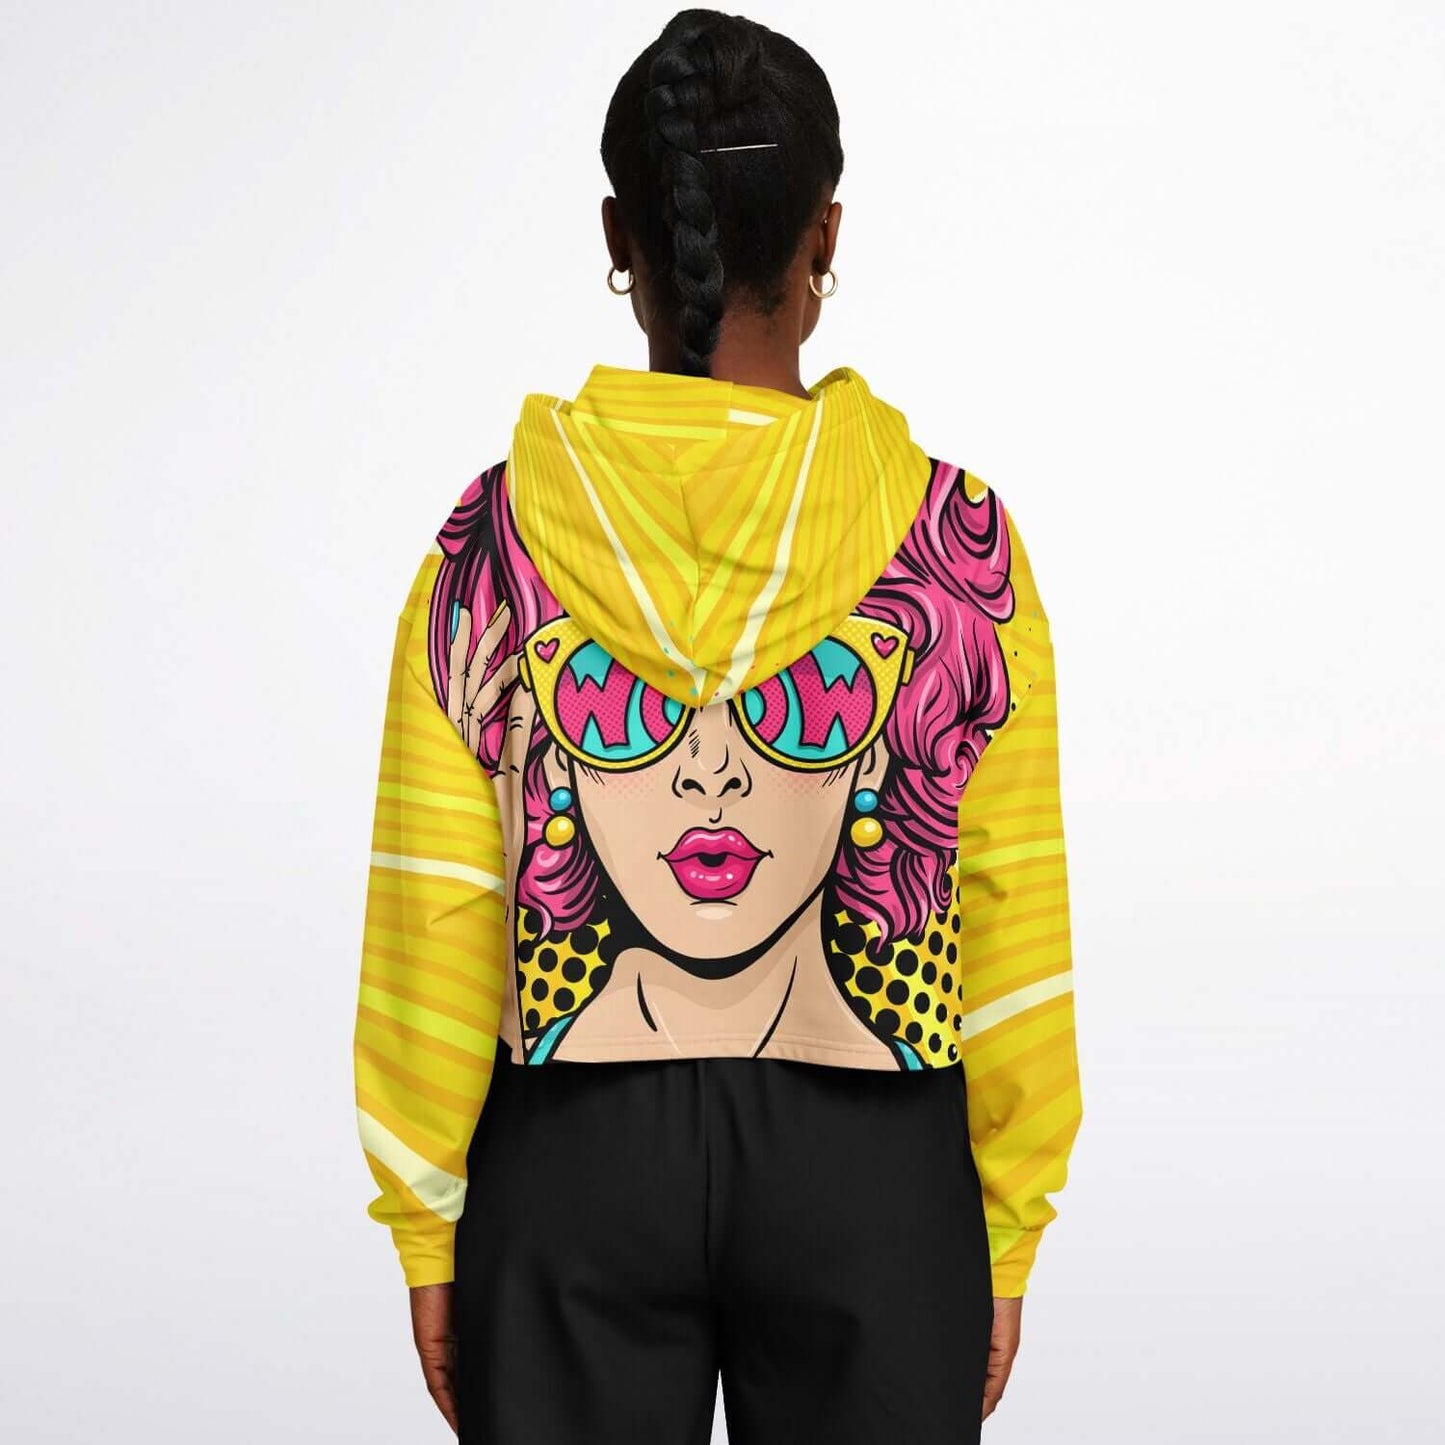 WOW Lady Yellow Cropped Hoodie